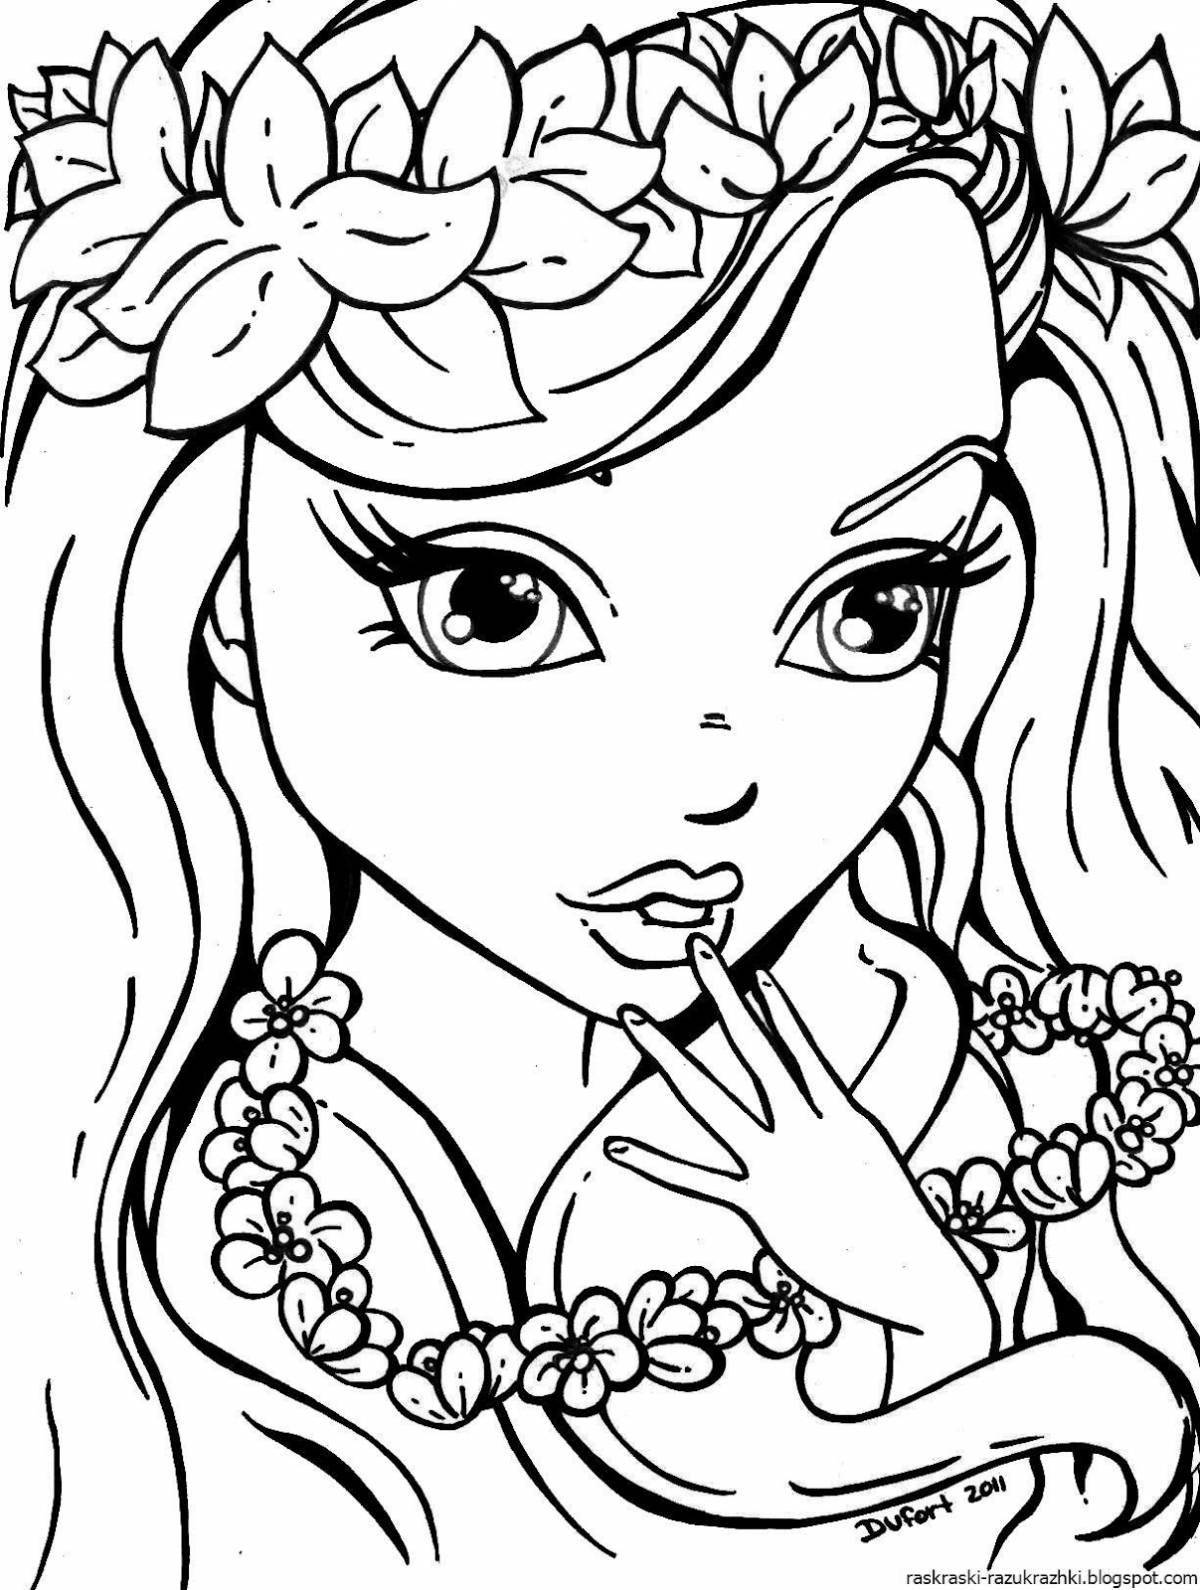 Creative coloring pages for 8 year olds